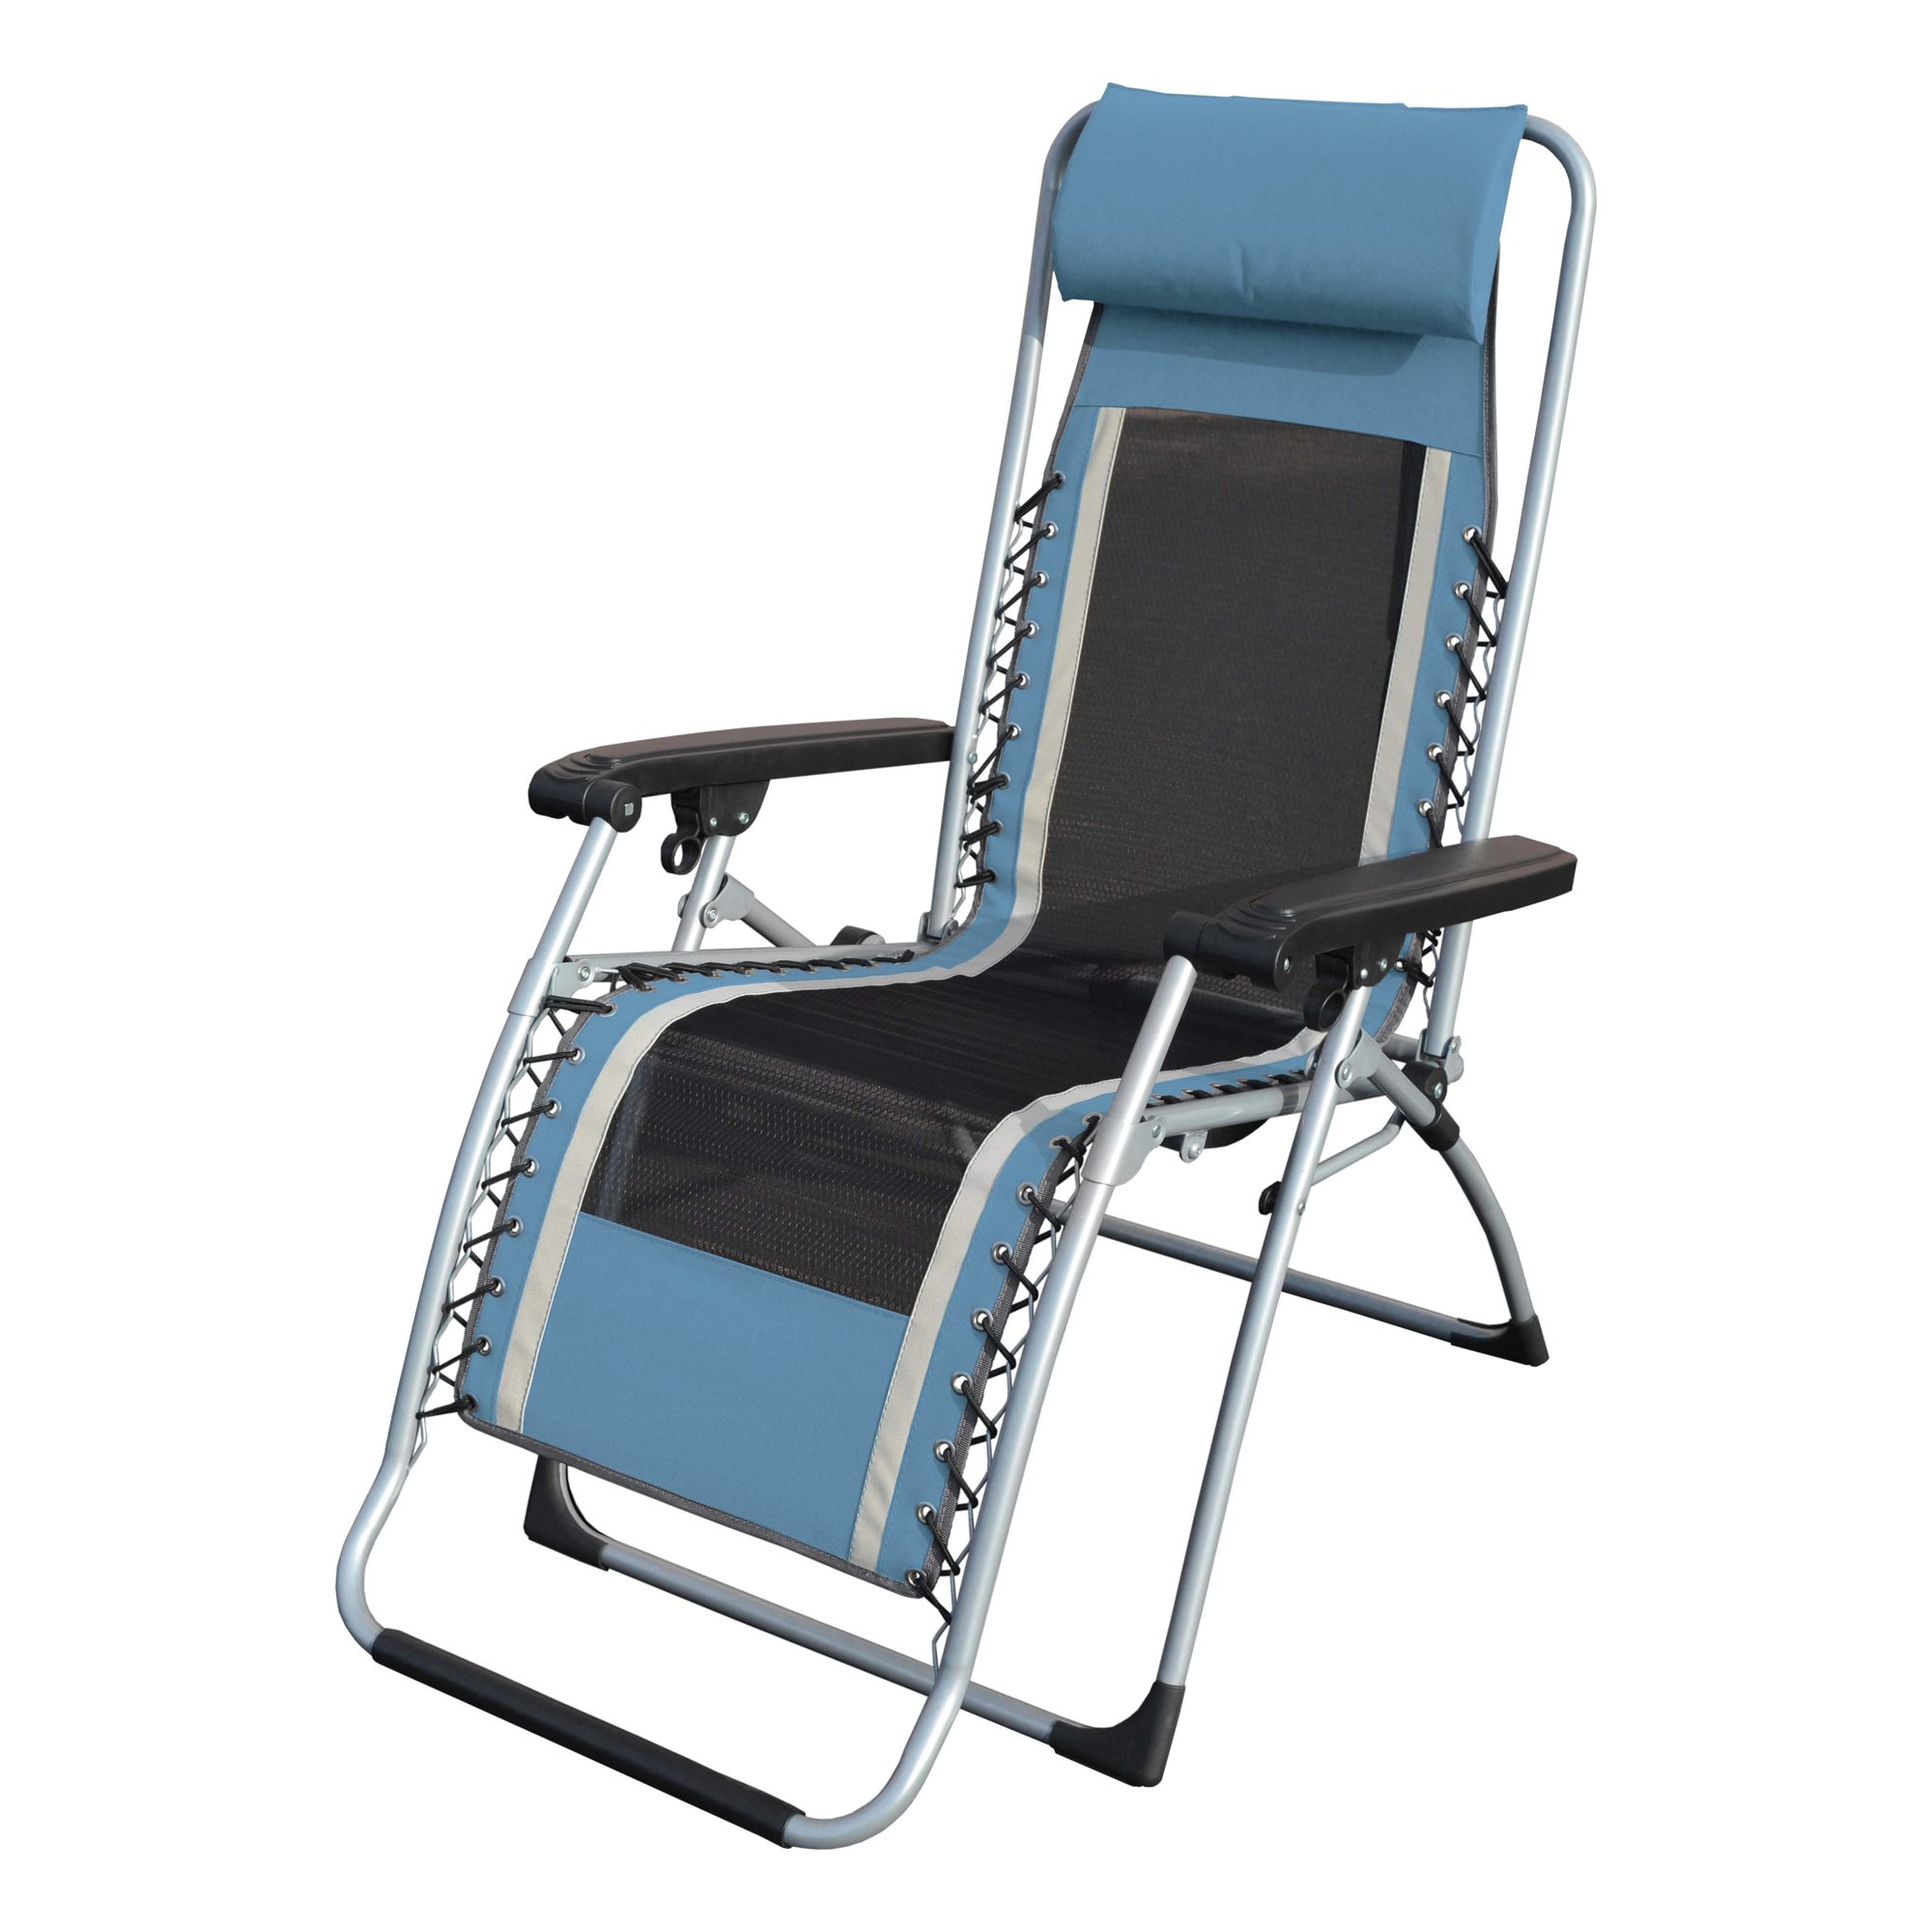 Caravan Canopy, Infinity OG-Lounger Zero Gravity Chair, Primary Color Blue, Material Textile, Width 25.98 in, Model OGL01021